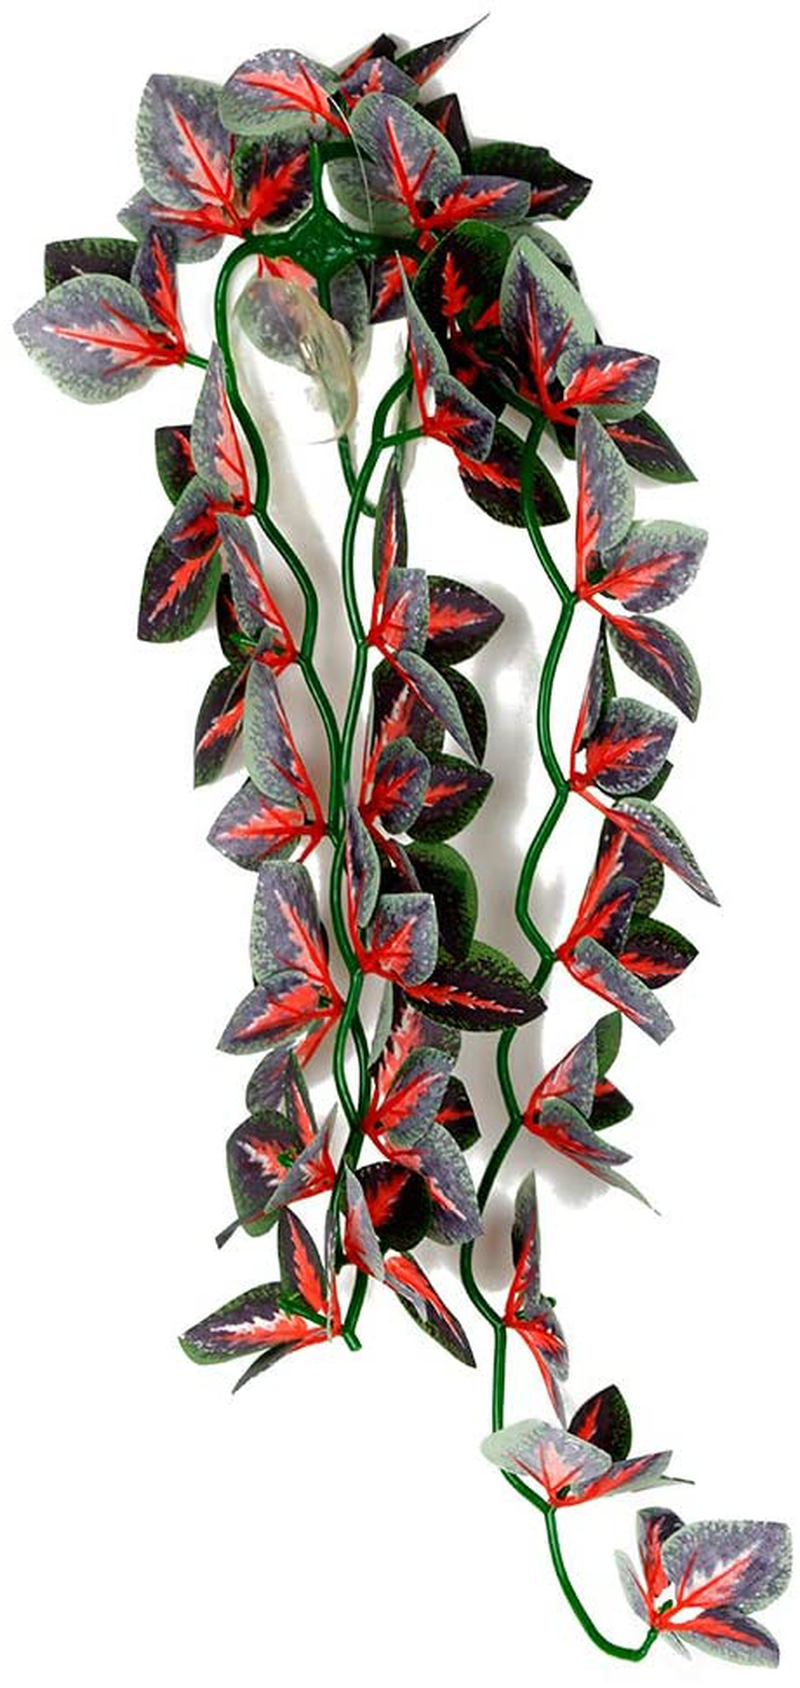 Reptiles Plants ,2 Pieces Hanging Silk Terrarium Leaves for Reptile & Amphibian Habitat Décor Ornaments with Suction Cup for Bearded Dragons,Lizards,Geckos,Snake Pets Tank Habitat Decorations Animals & Pet Supplies > Pet Supplies > Reptile & Amphibian Supplies fivebull   